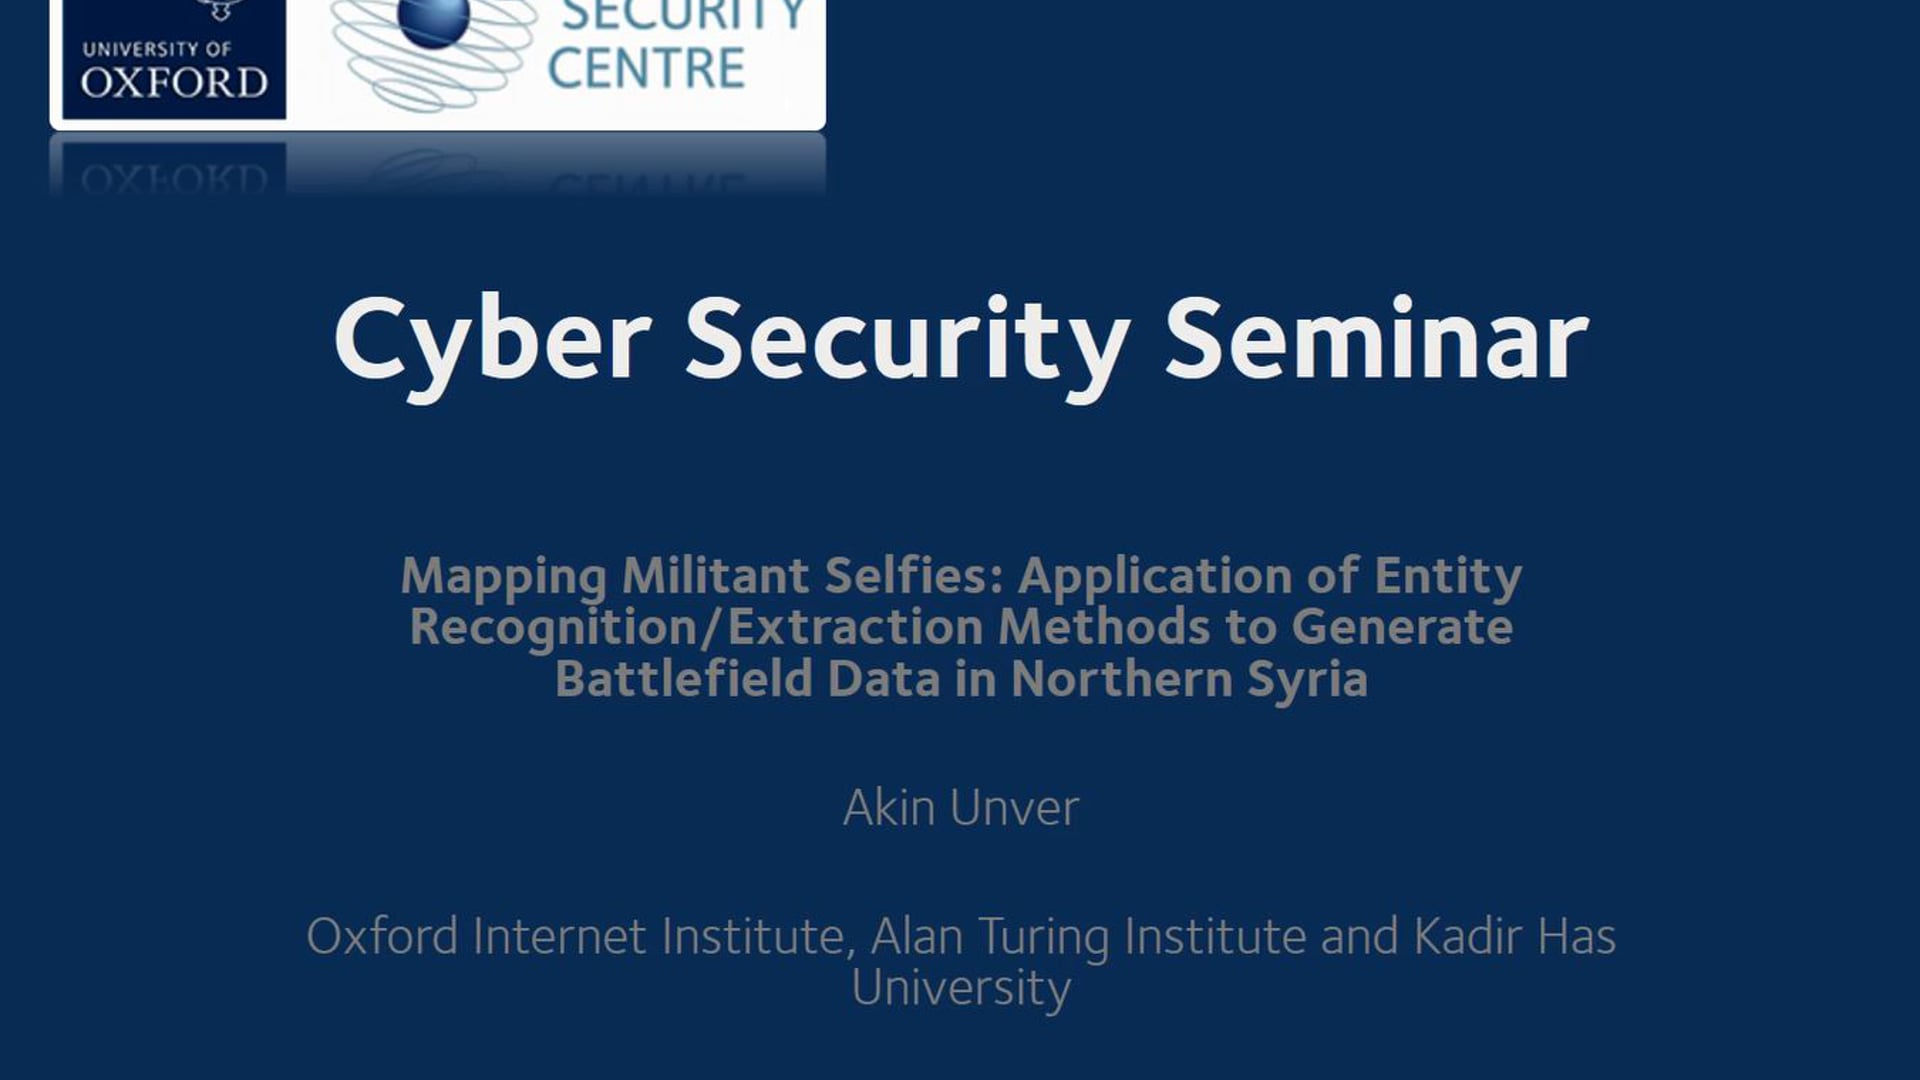 Cyber Security Seminar: Mapping Militant Selfies